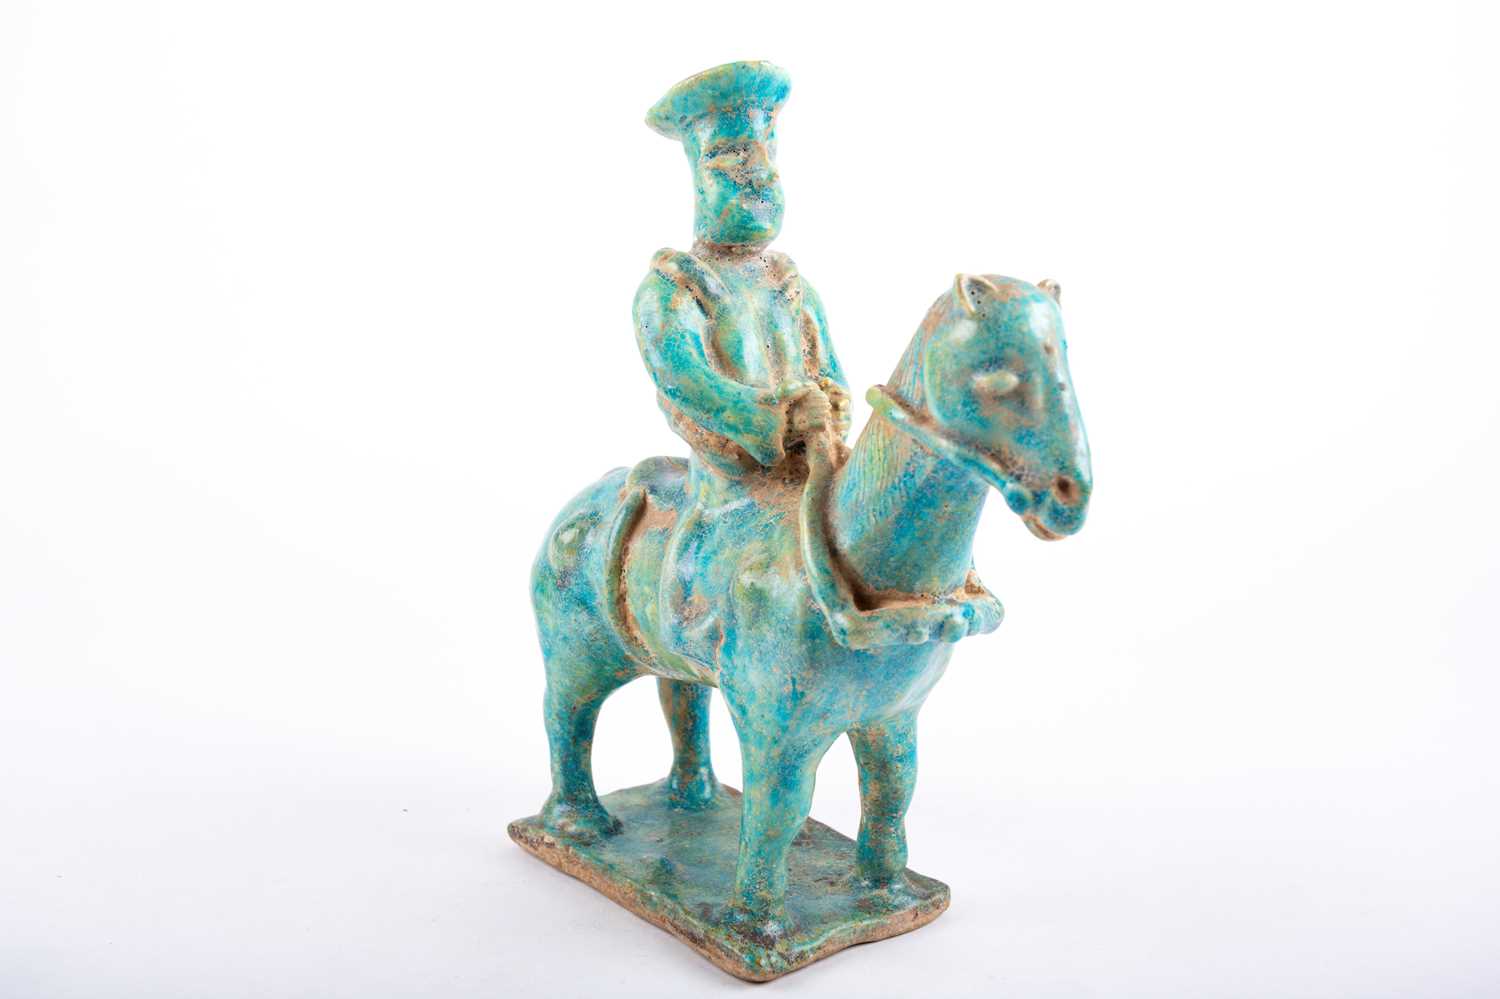 A Persian Kashan pottery equestrian figure, 13th century or later, the seated figure wearing a hat